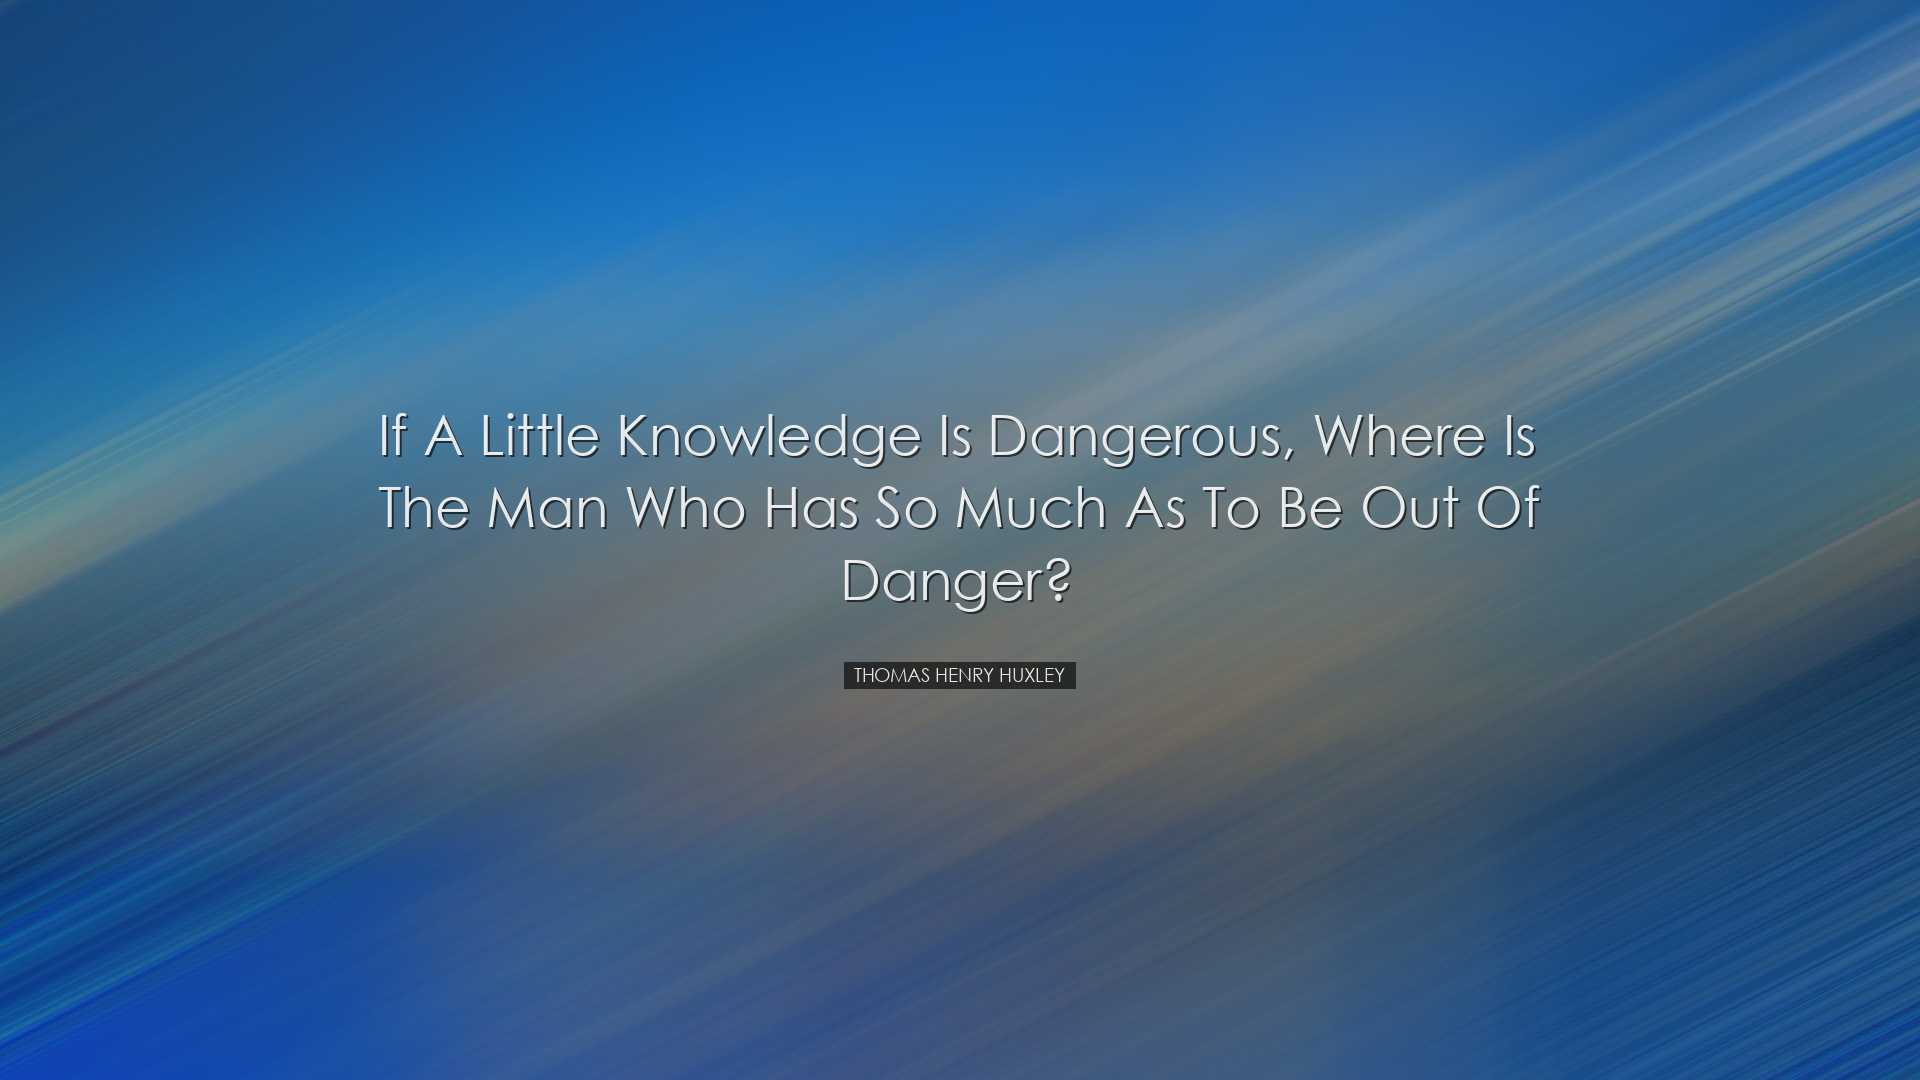 If a little knowledge is dangerous, where is the man who has so mu